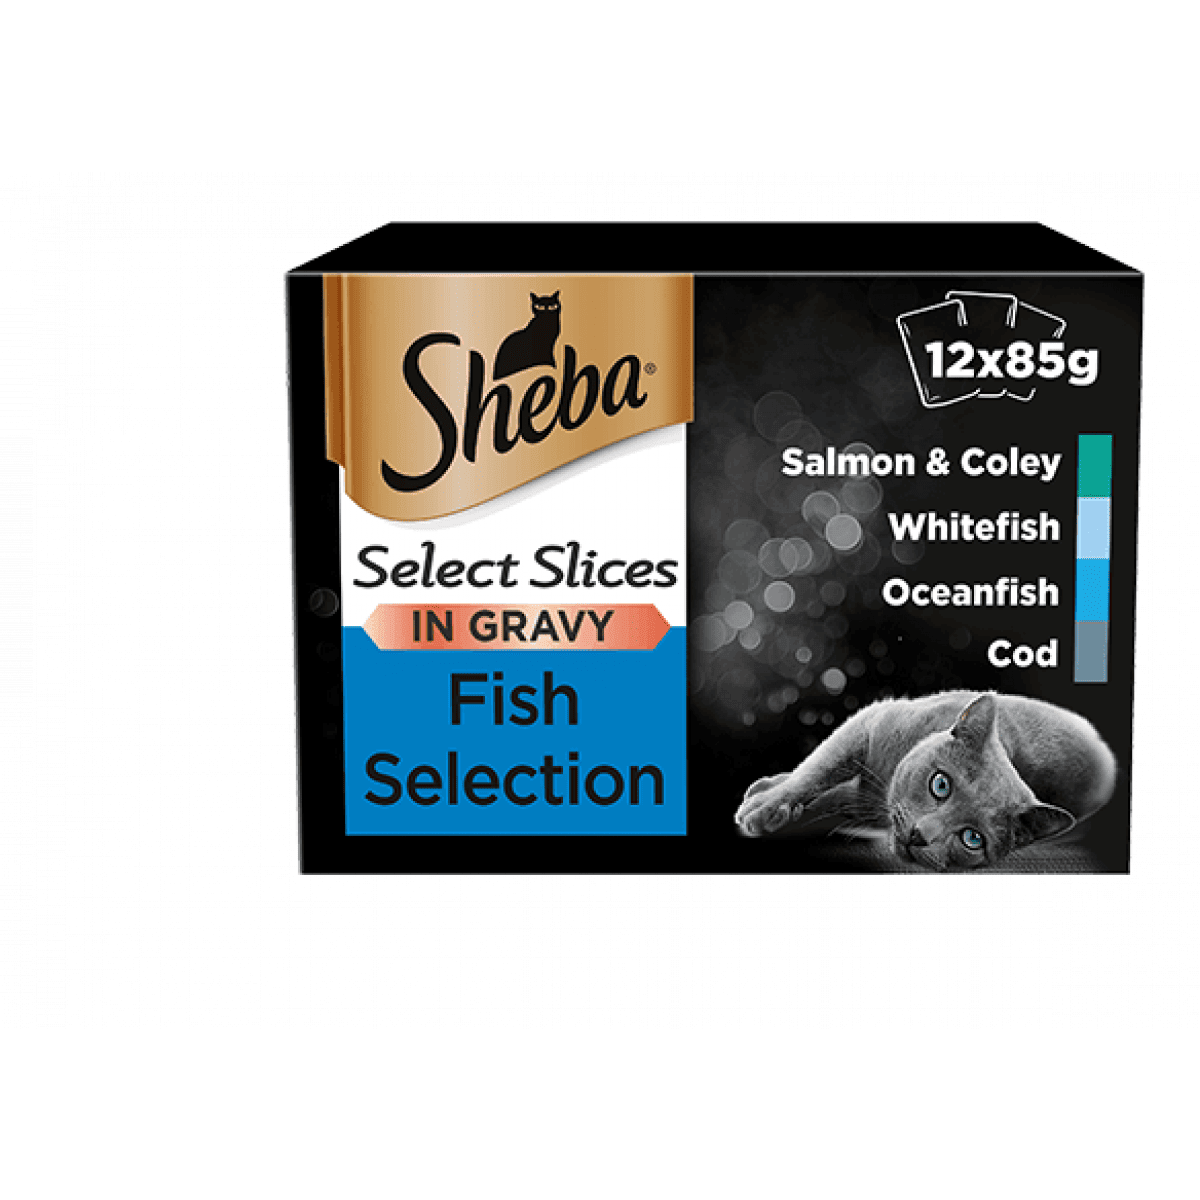 Sheba SS Fish Collection in Gravy 12 x 85g Product Image